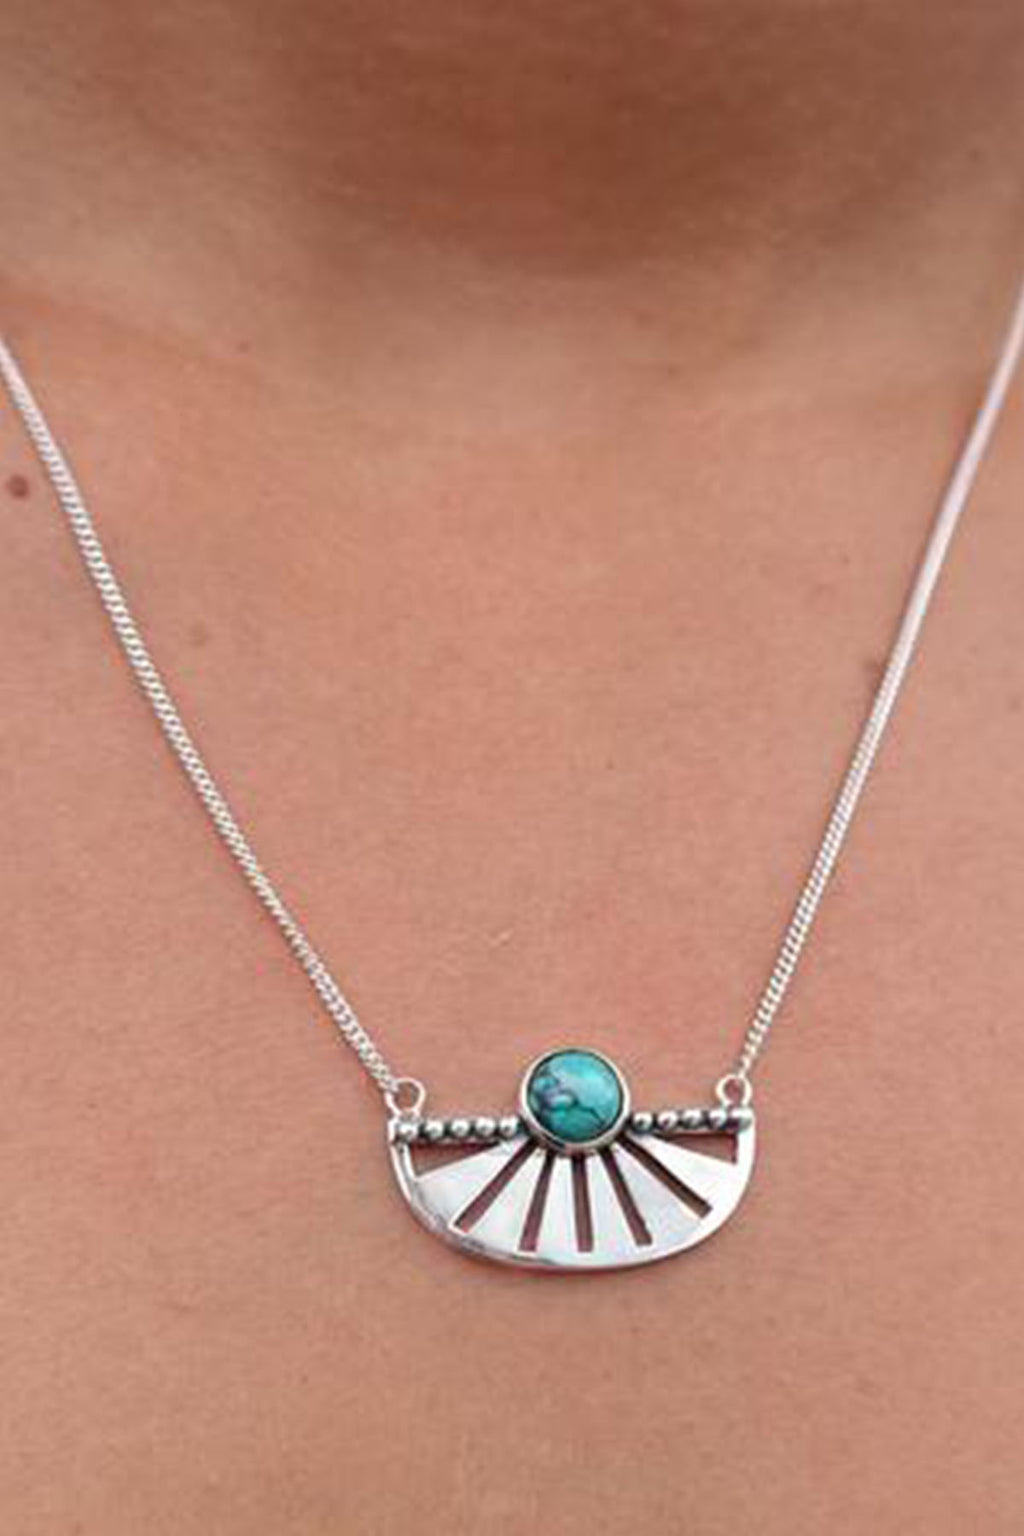 Adrift Silver Necklace - Turquoise - The Bohemian Corner